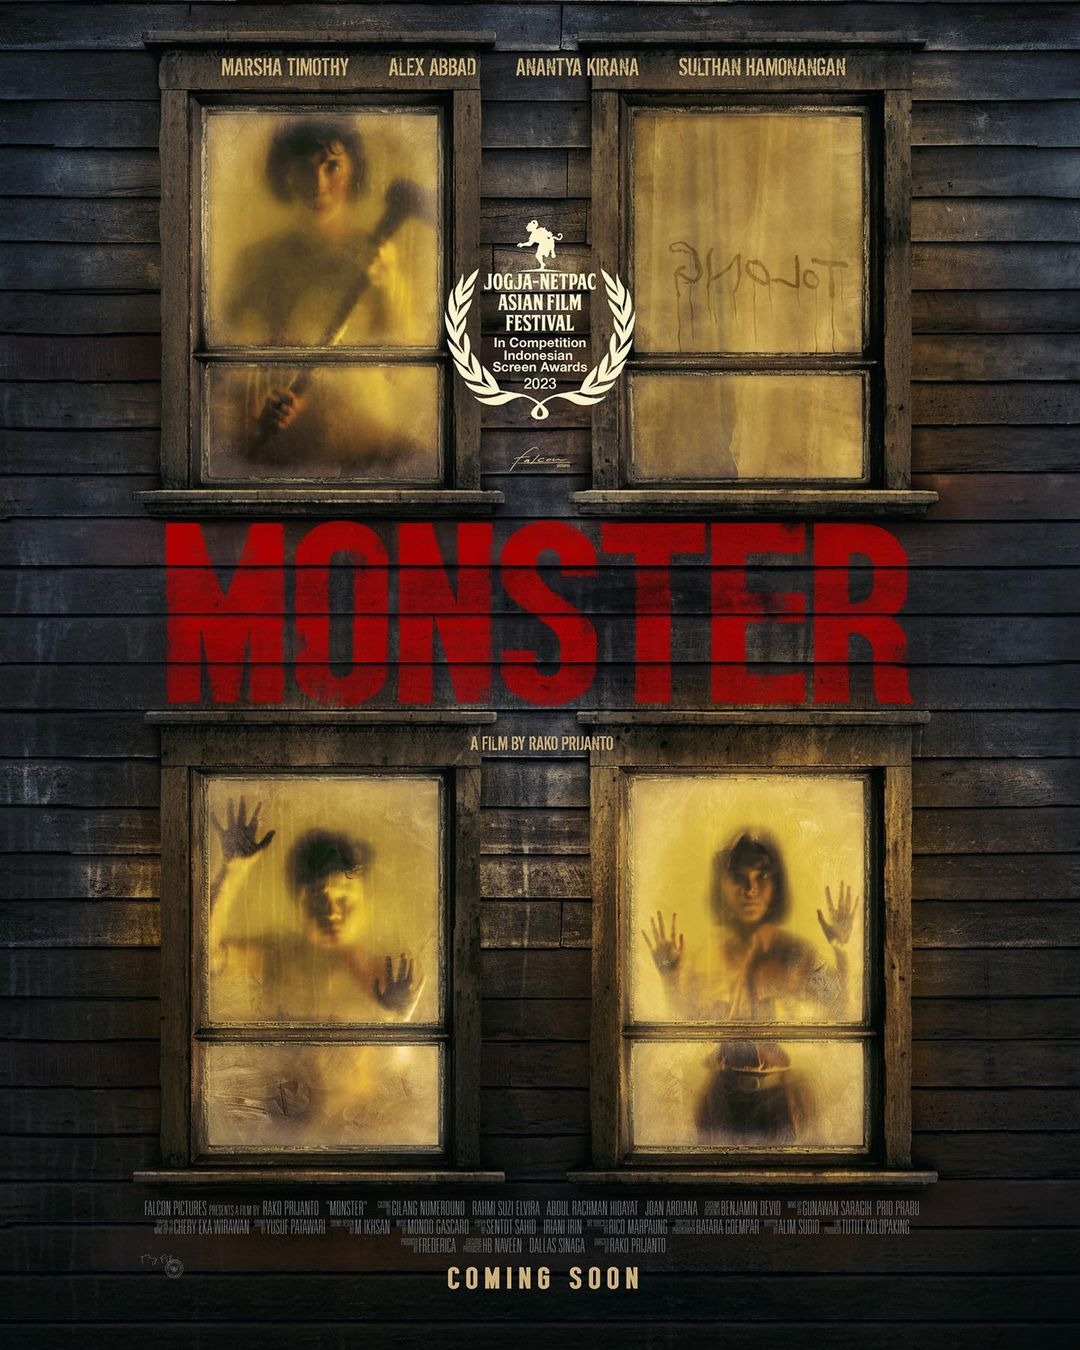 Extra Large Movie Poster Image for Monster 